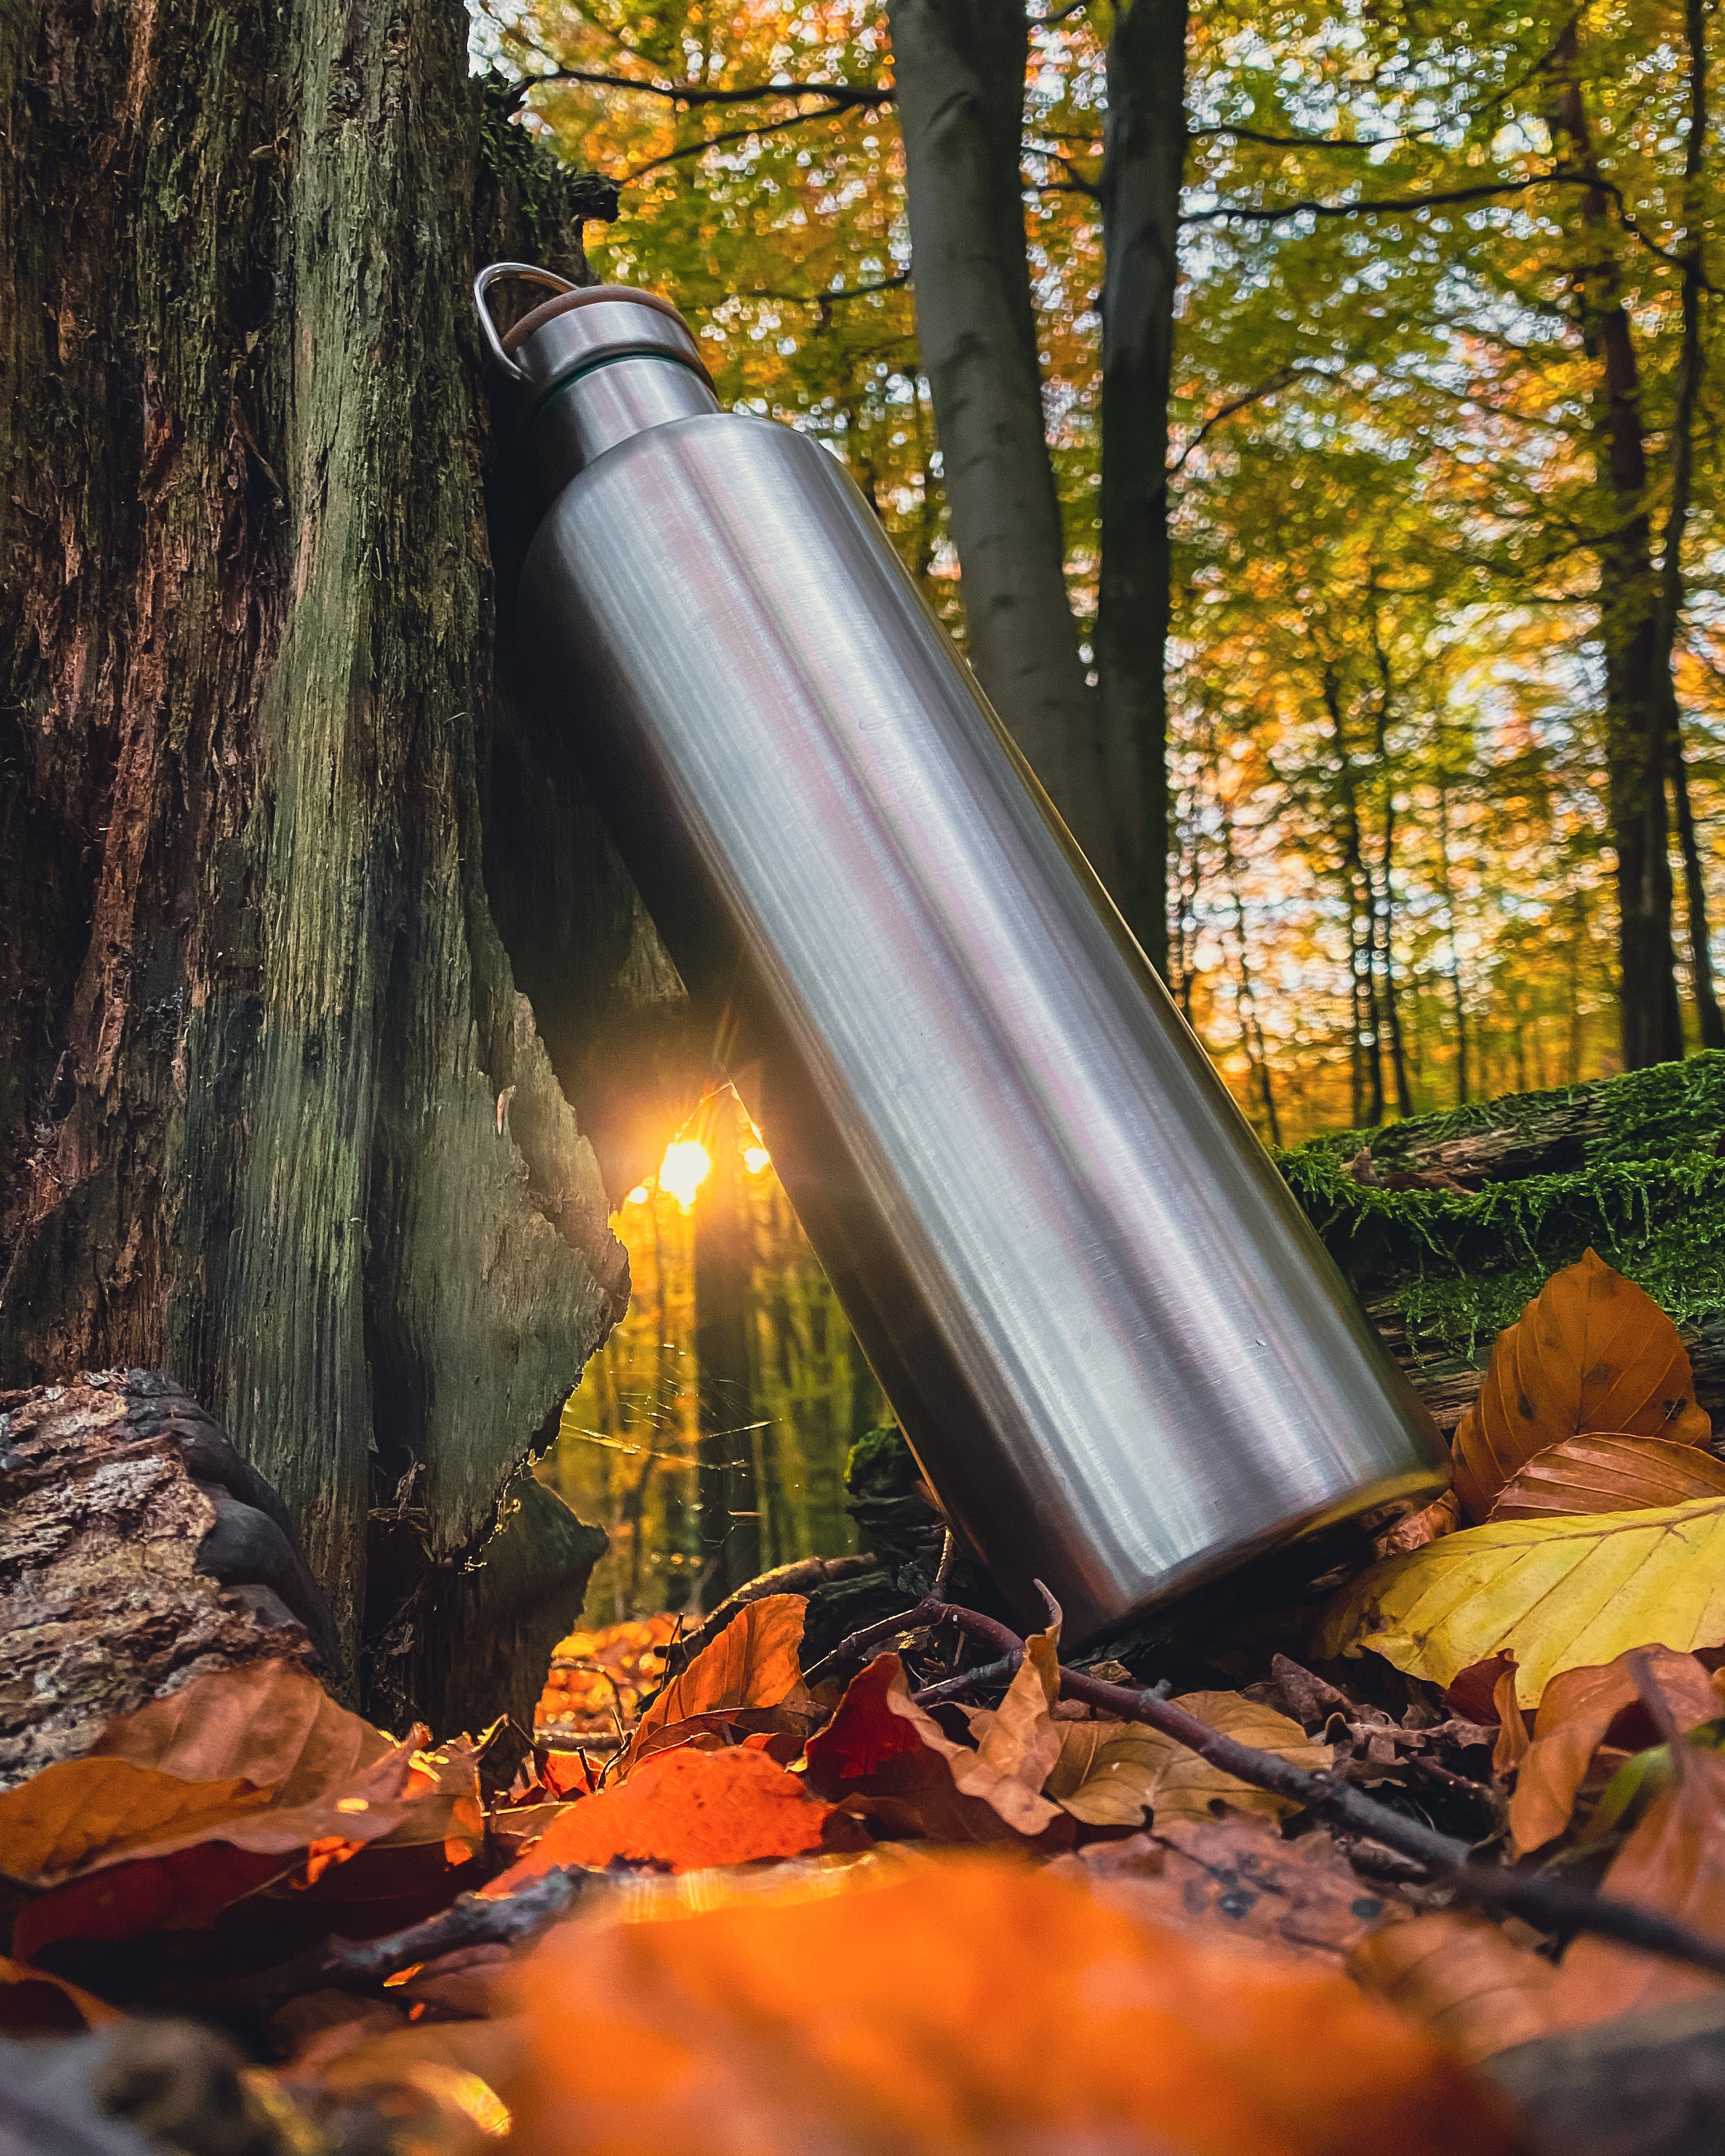 Blockhuette susainable stianless steel water bottle leaning on a tree in the forest